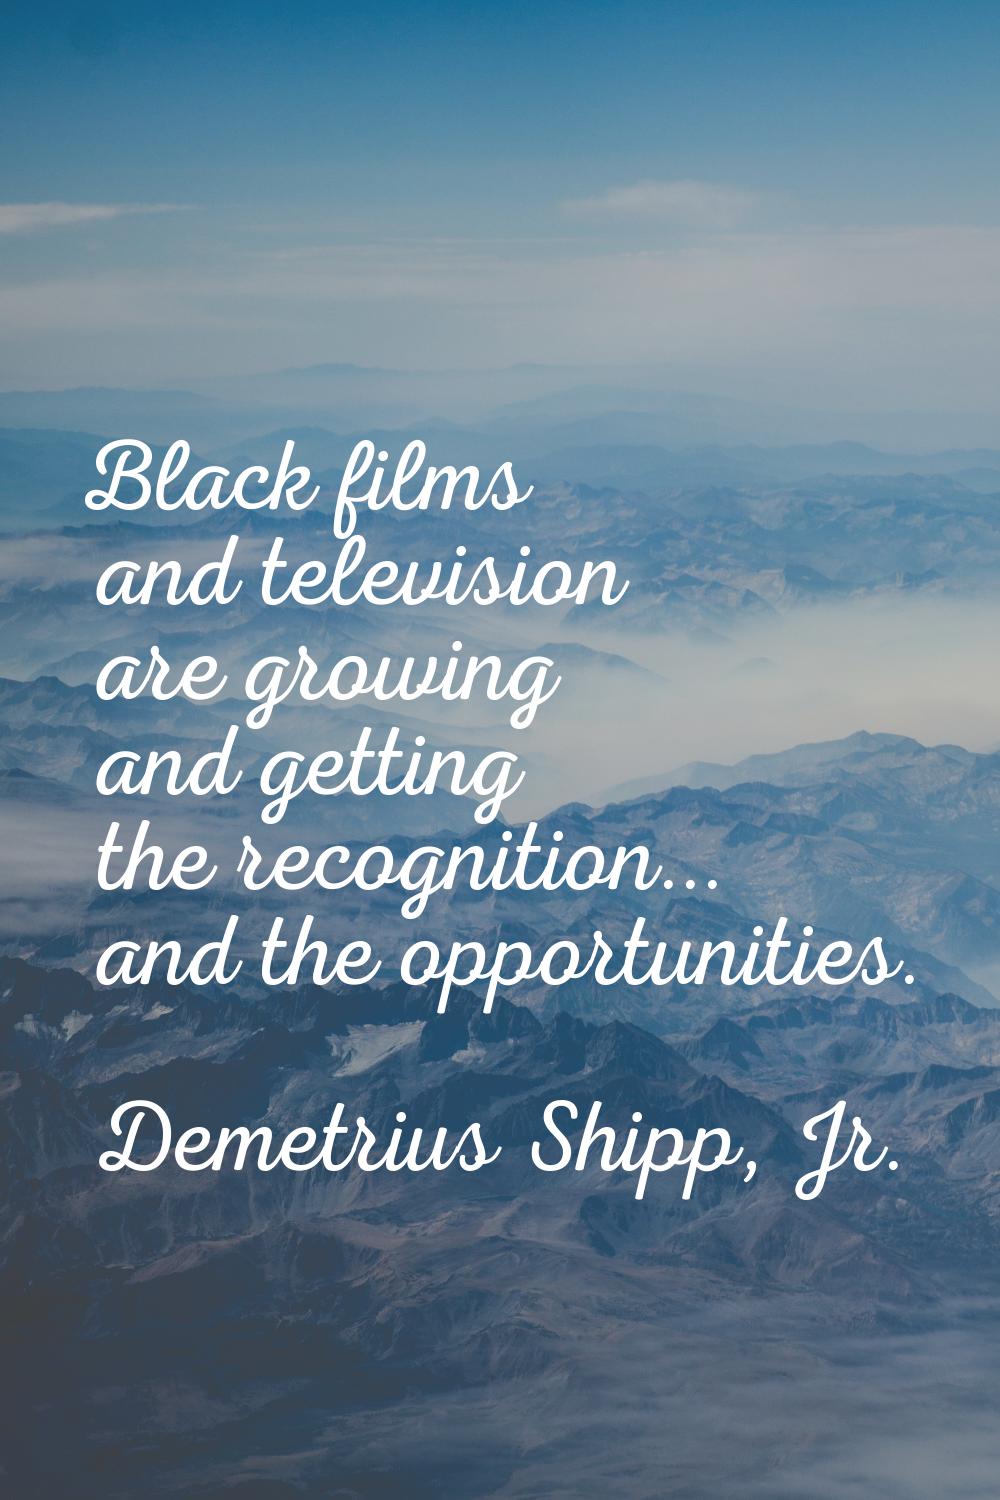 Black films and television are growing and getting the recognition... and the opportunities.